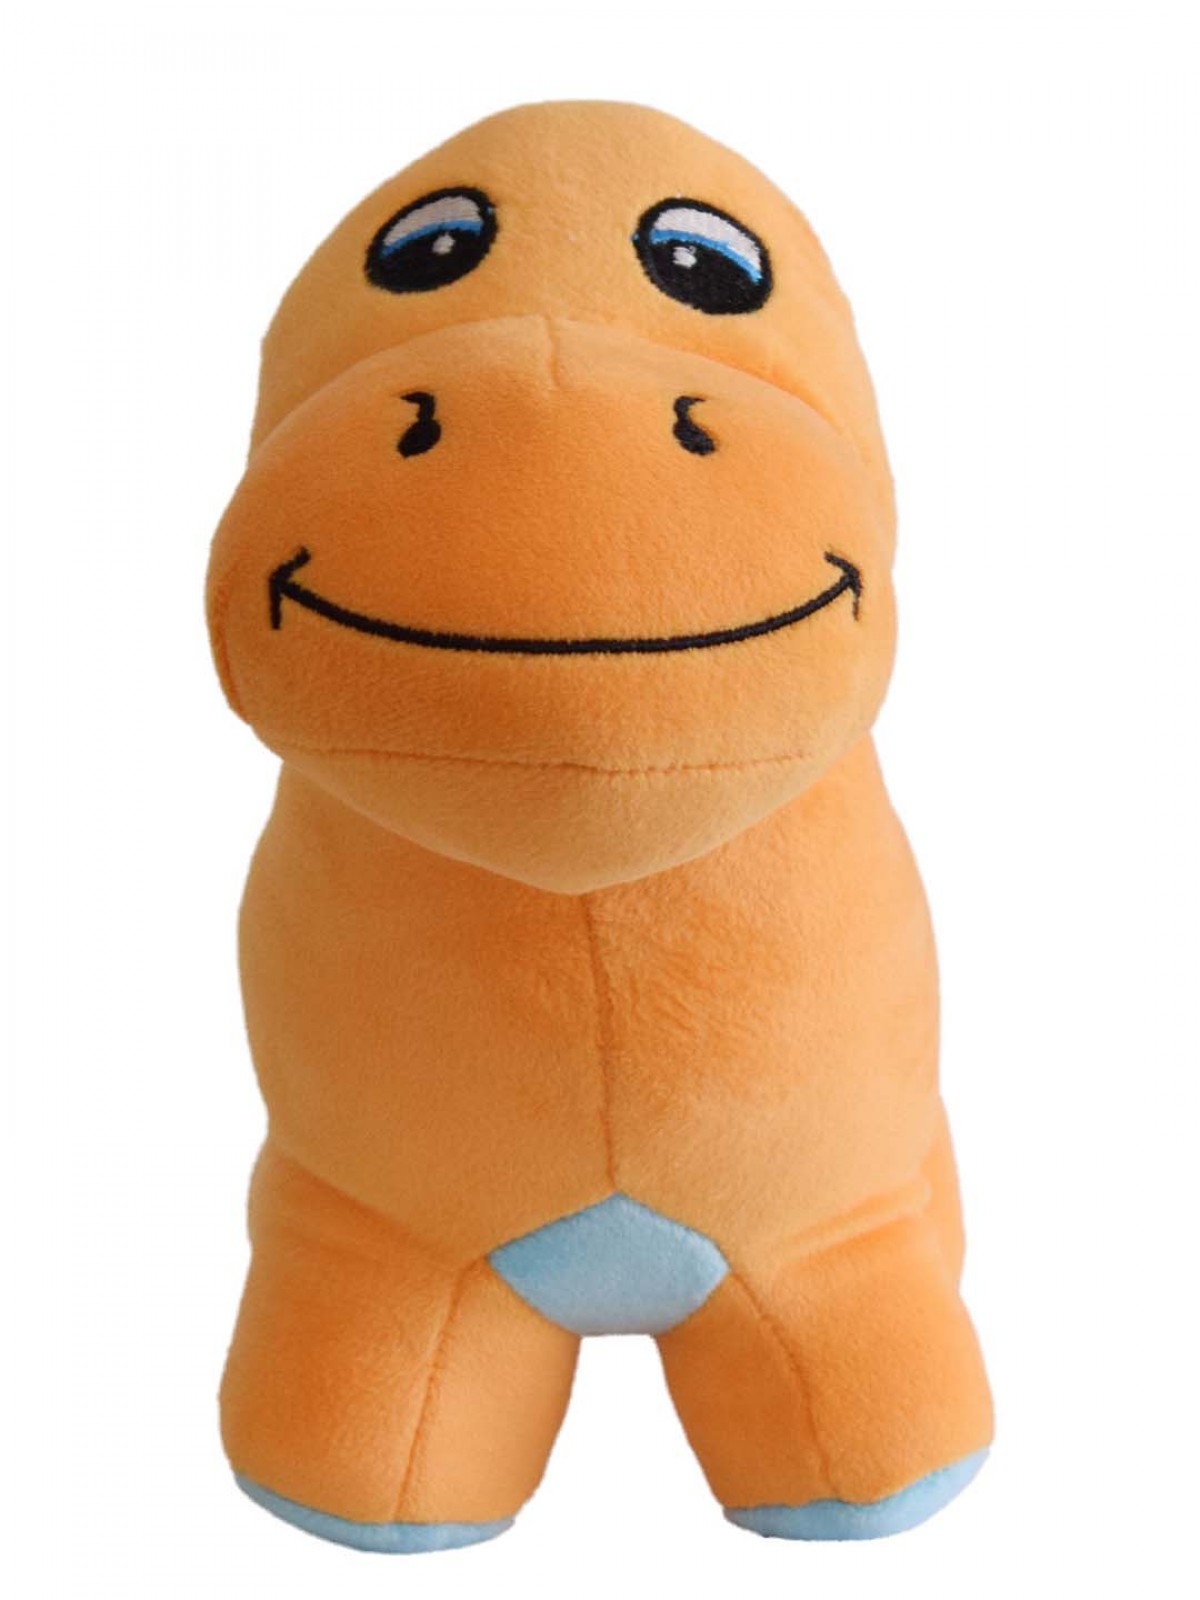 Adorable Stuffed Plush Dinosaur By Mirada, Soft Toys For Kids Of All Ages, 3Y+, Orange, 30Cm